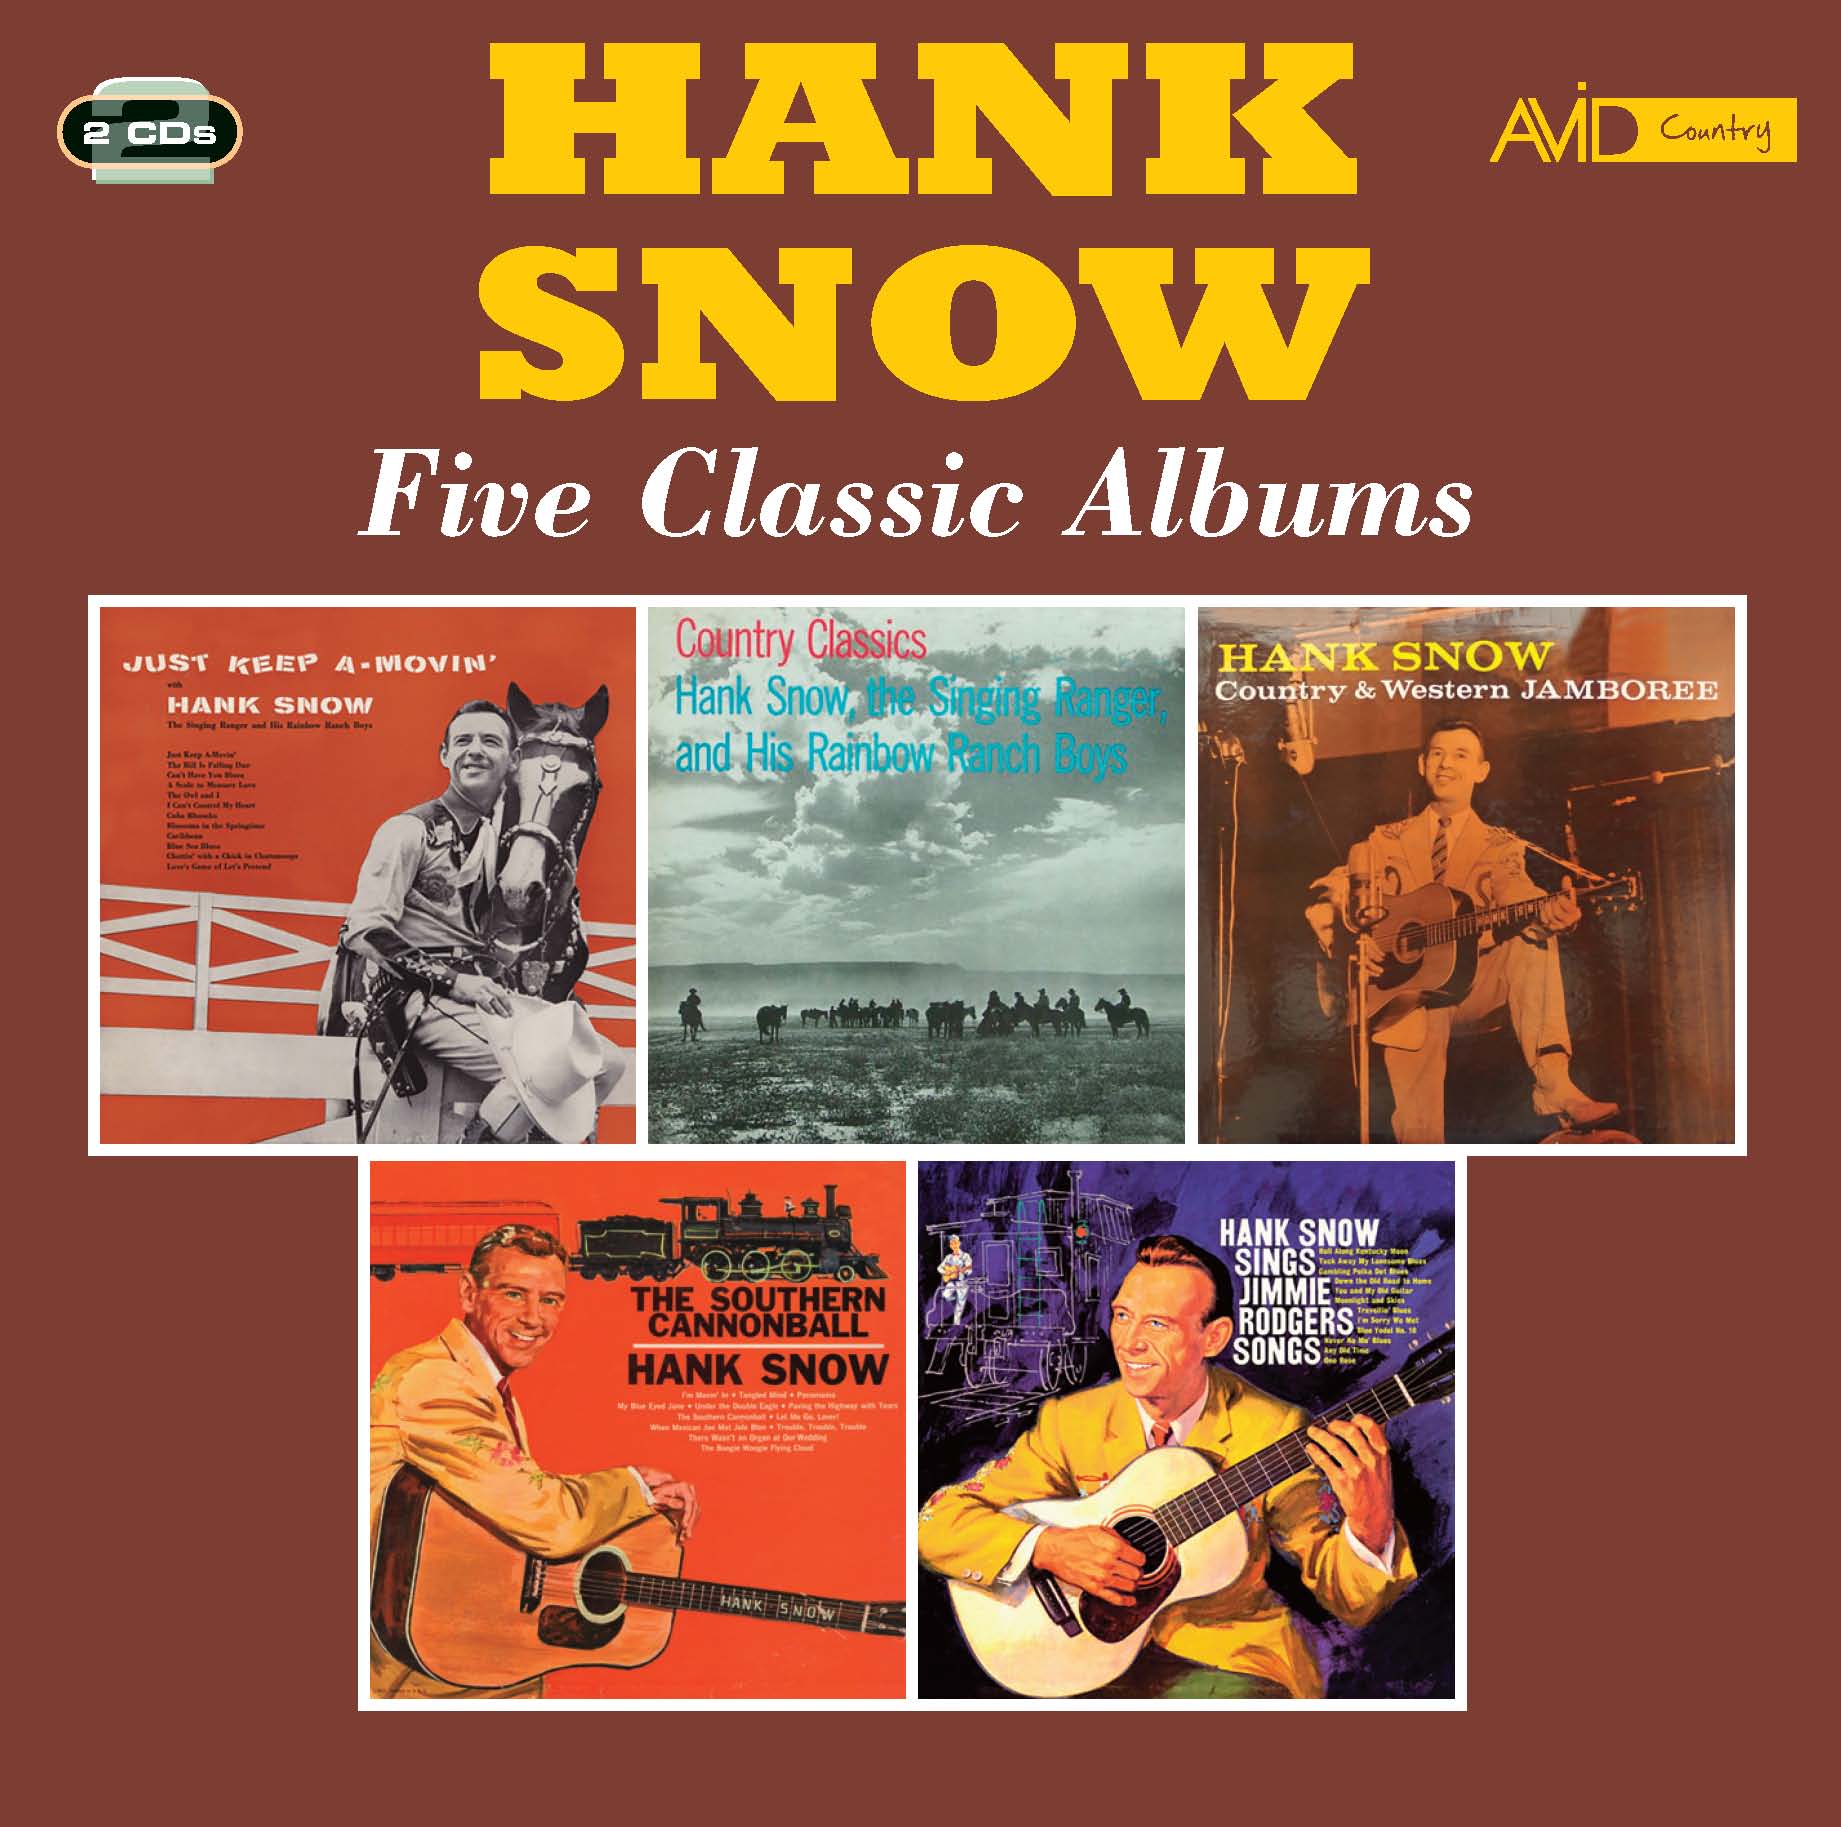 (Just　Classics　Rodgers　Country　(2CD)　Albums　Jamboree　Jimmie　Sings　The　Keep　Cannonball　Songs)　A-Movin'　Western　Five　Country　Hank　Southern　Snow:　Classic